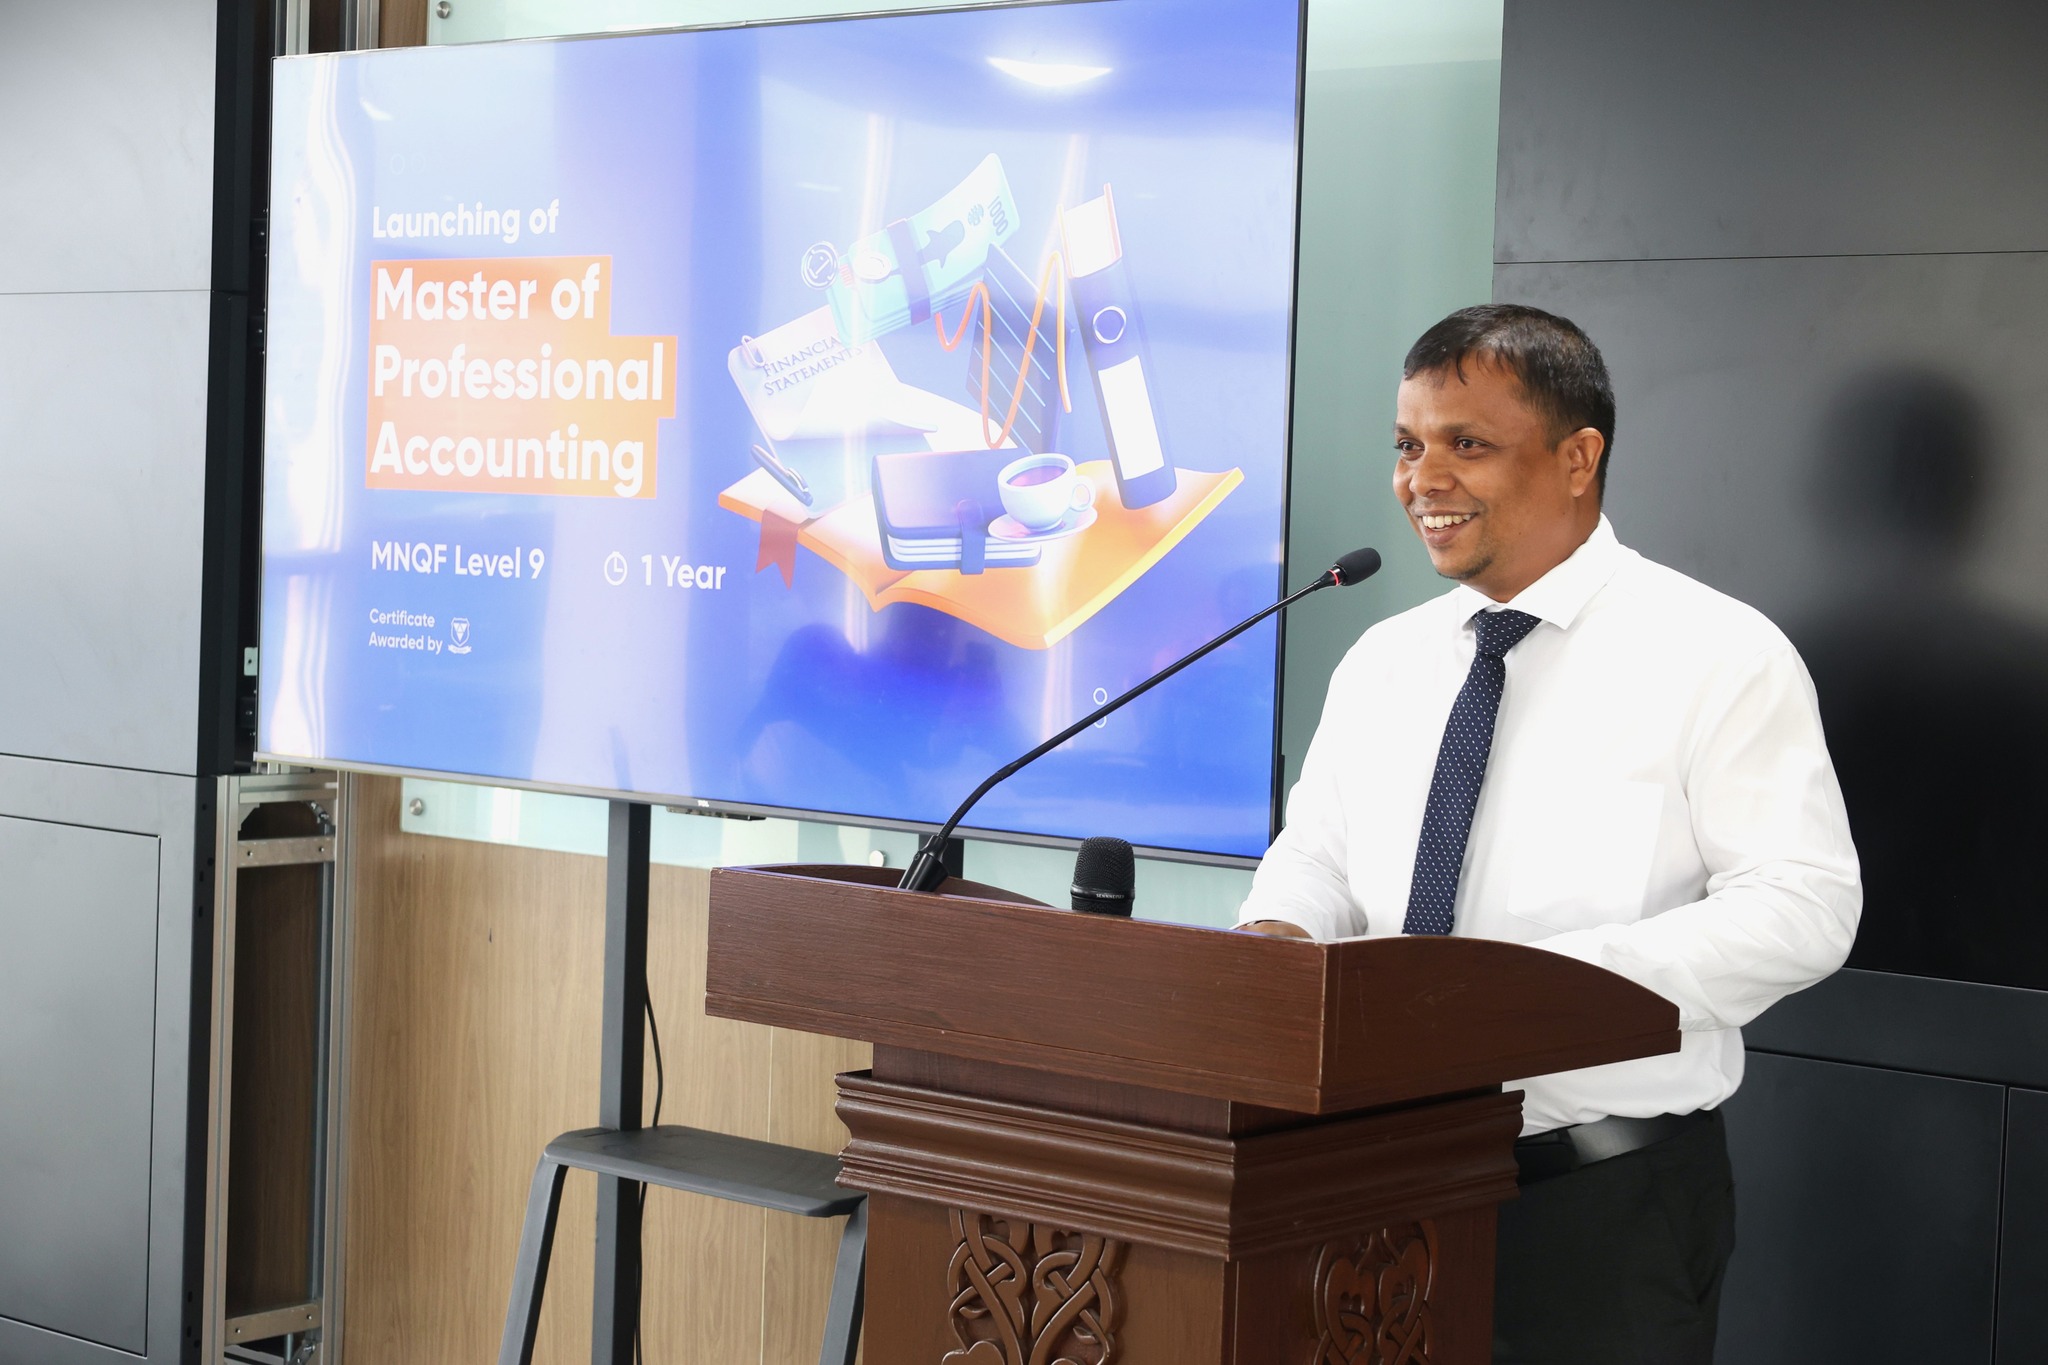 VILLA COLLEGE LAUNCHES NEW PROGRAMME: MASTERS OF PROFESSIONAL ACCOUNTING